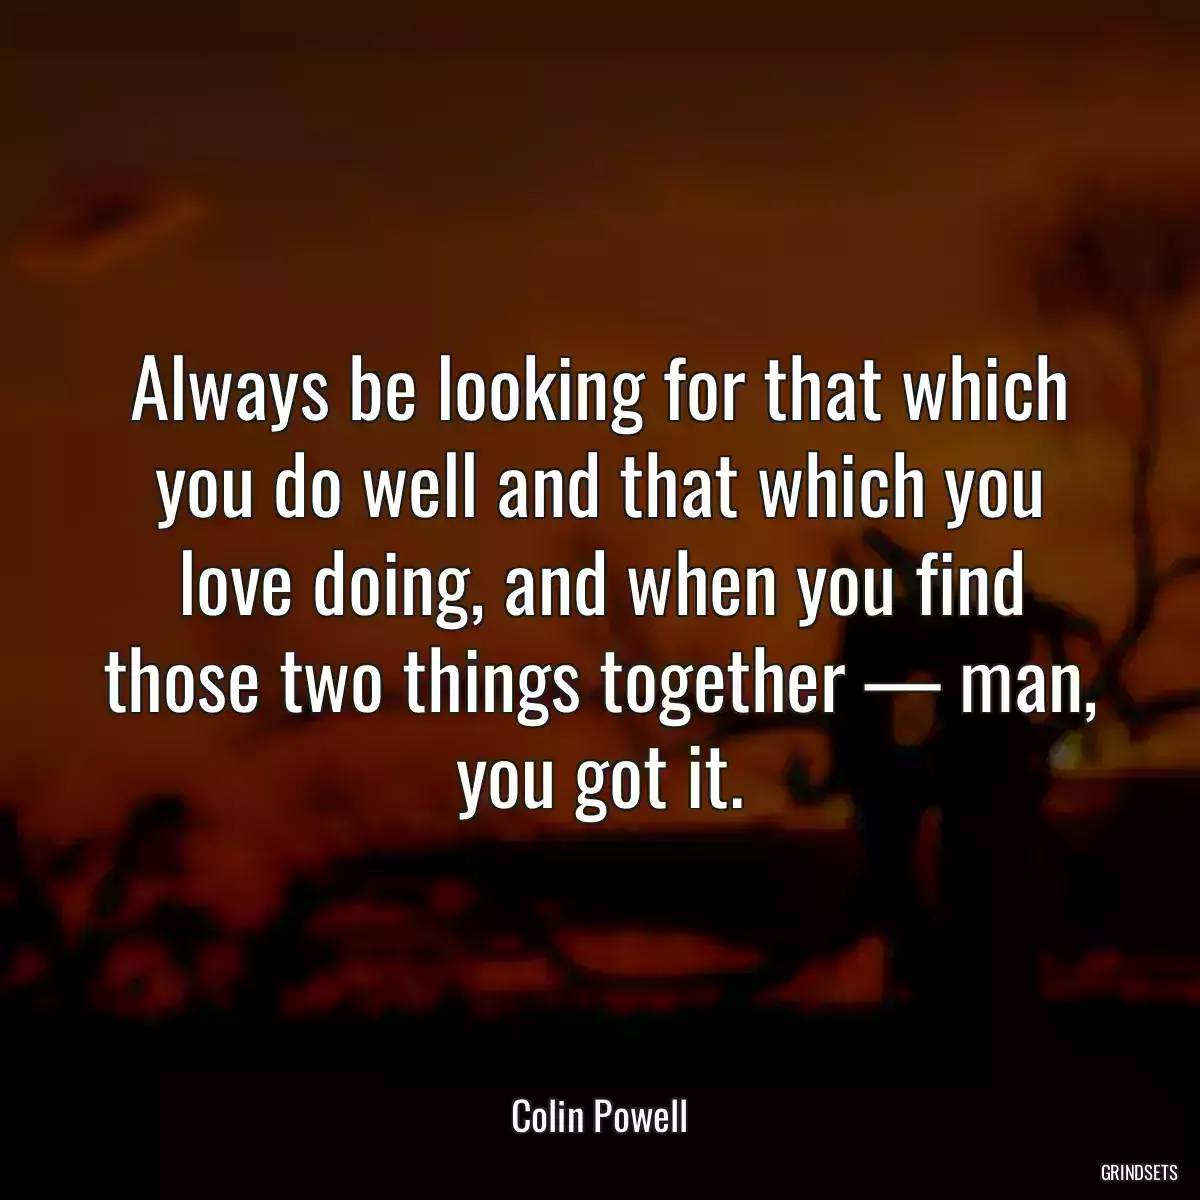 Always be looking for that which you do well and that which you love doing, and when you find those two things together — man, you got it.